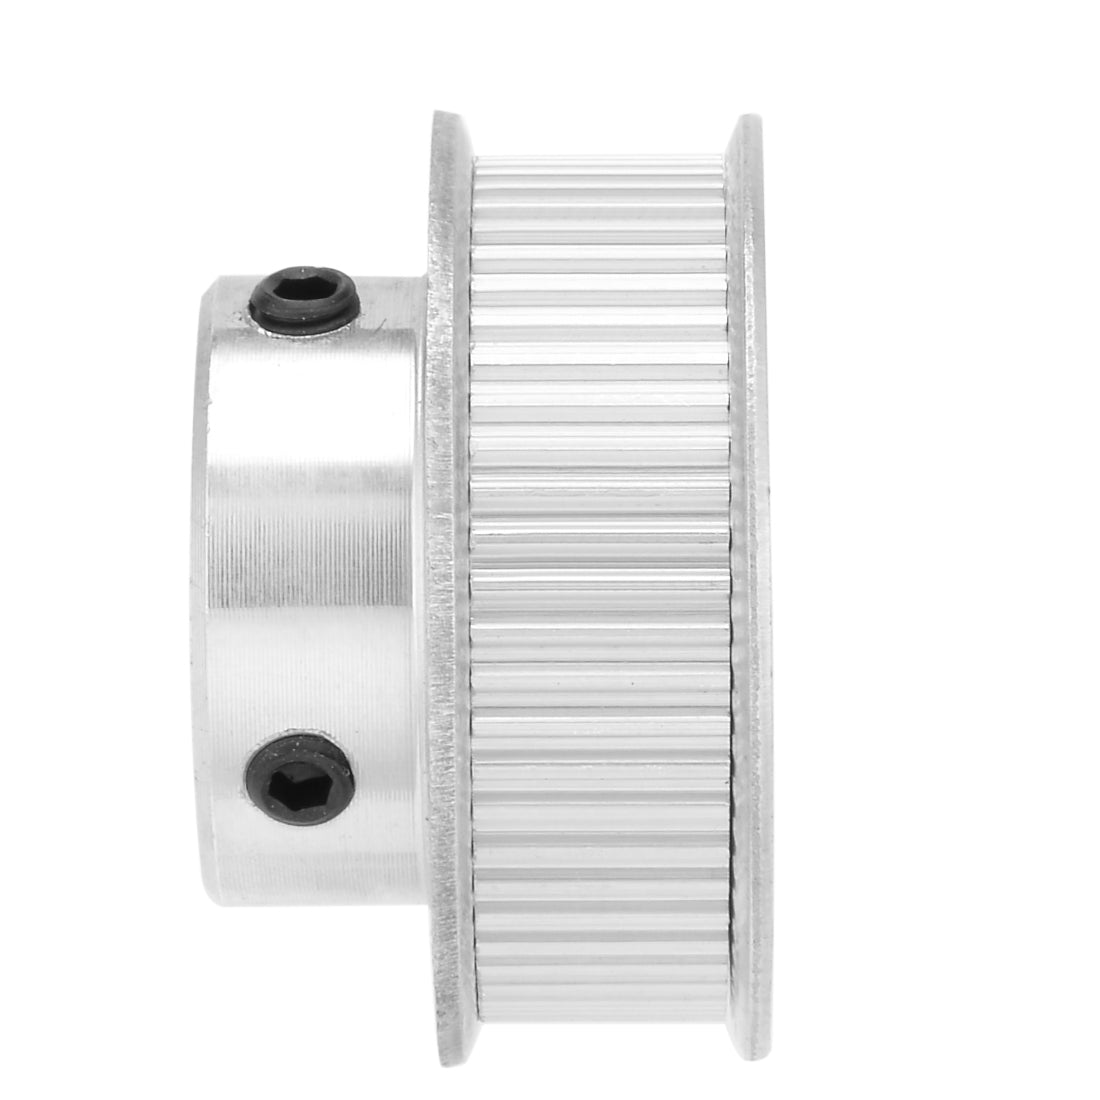 uxcell Uxcell Aluminum M-X-L 60 Teeth 10mm Bore Timing Belt Idler Pulley Synchronous Wheel 10mm Belt for 3D Printer CNC